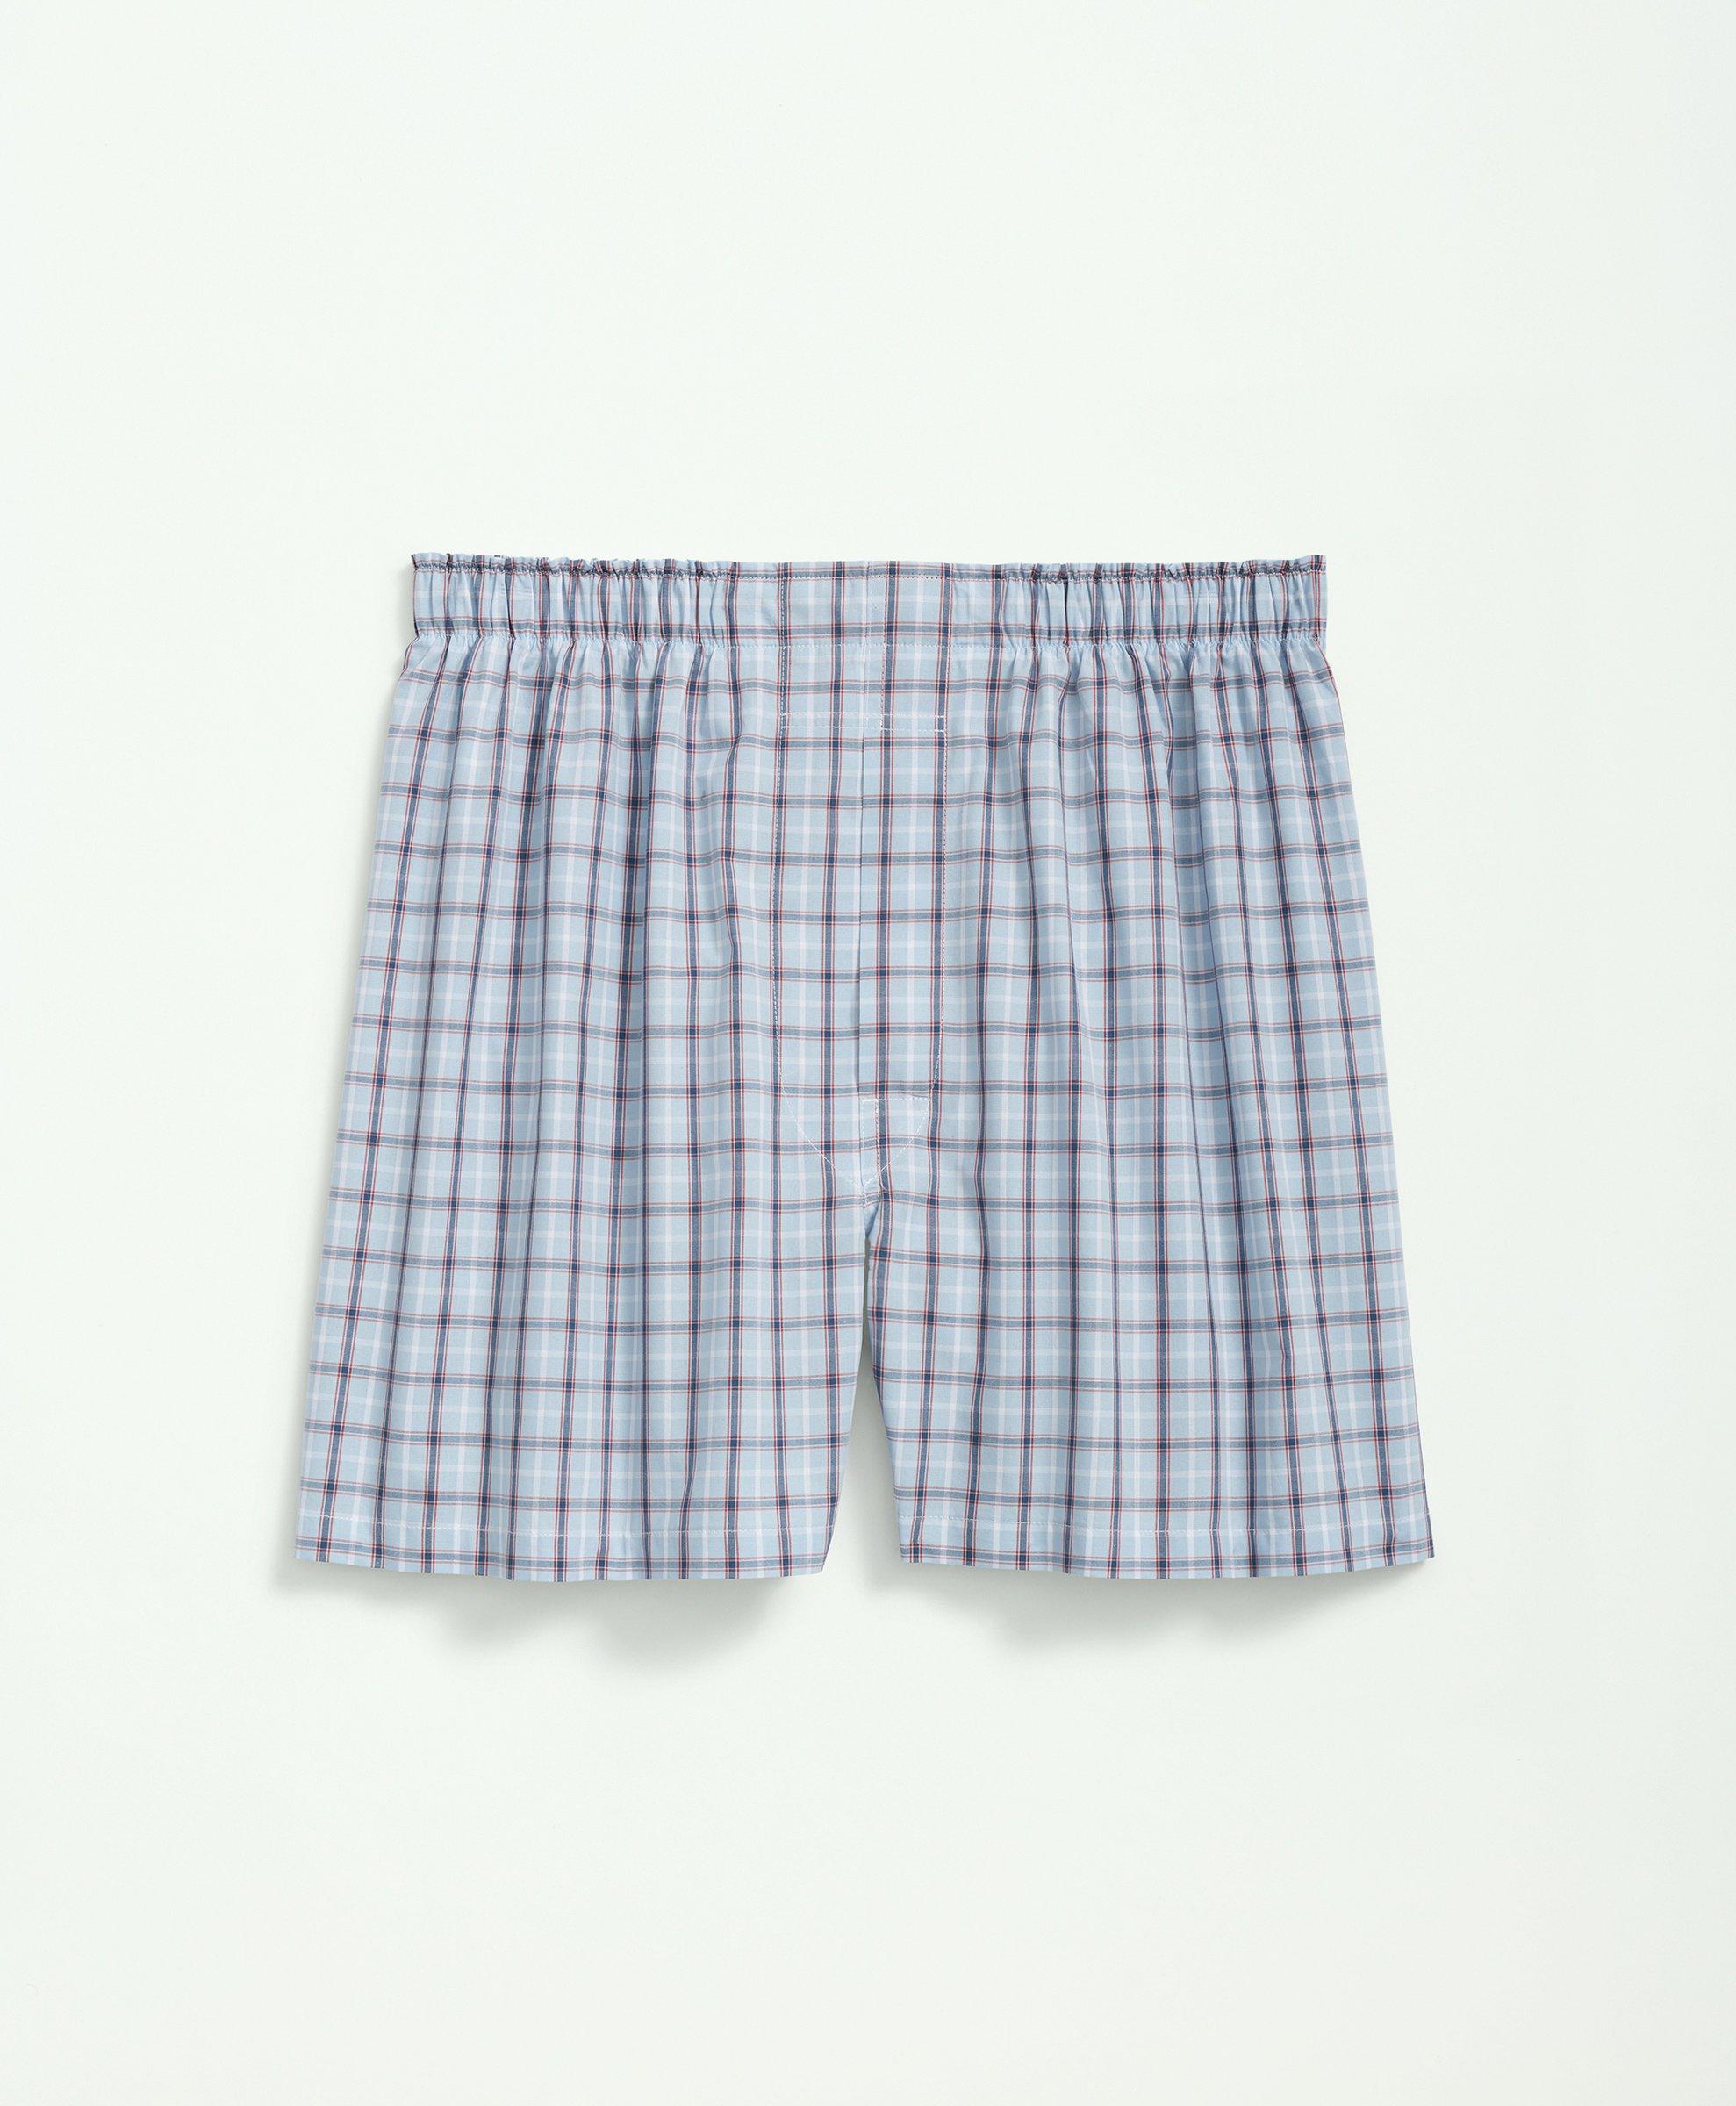 Breathable Cotton Plaid Boxer Plaid Shorts For Men Flexible, Big, And Sexy Underwear  From Merrylady, $17.86